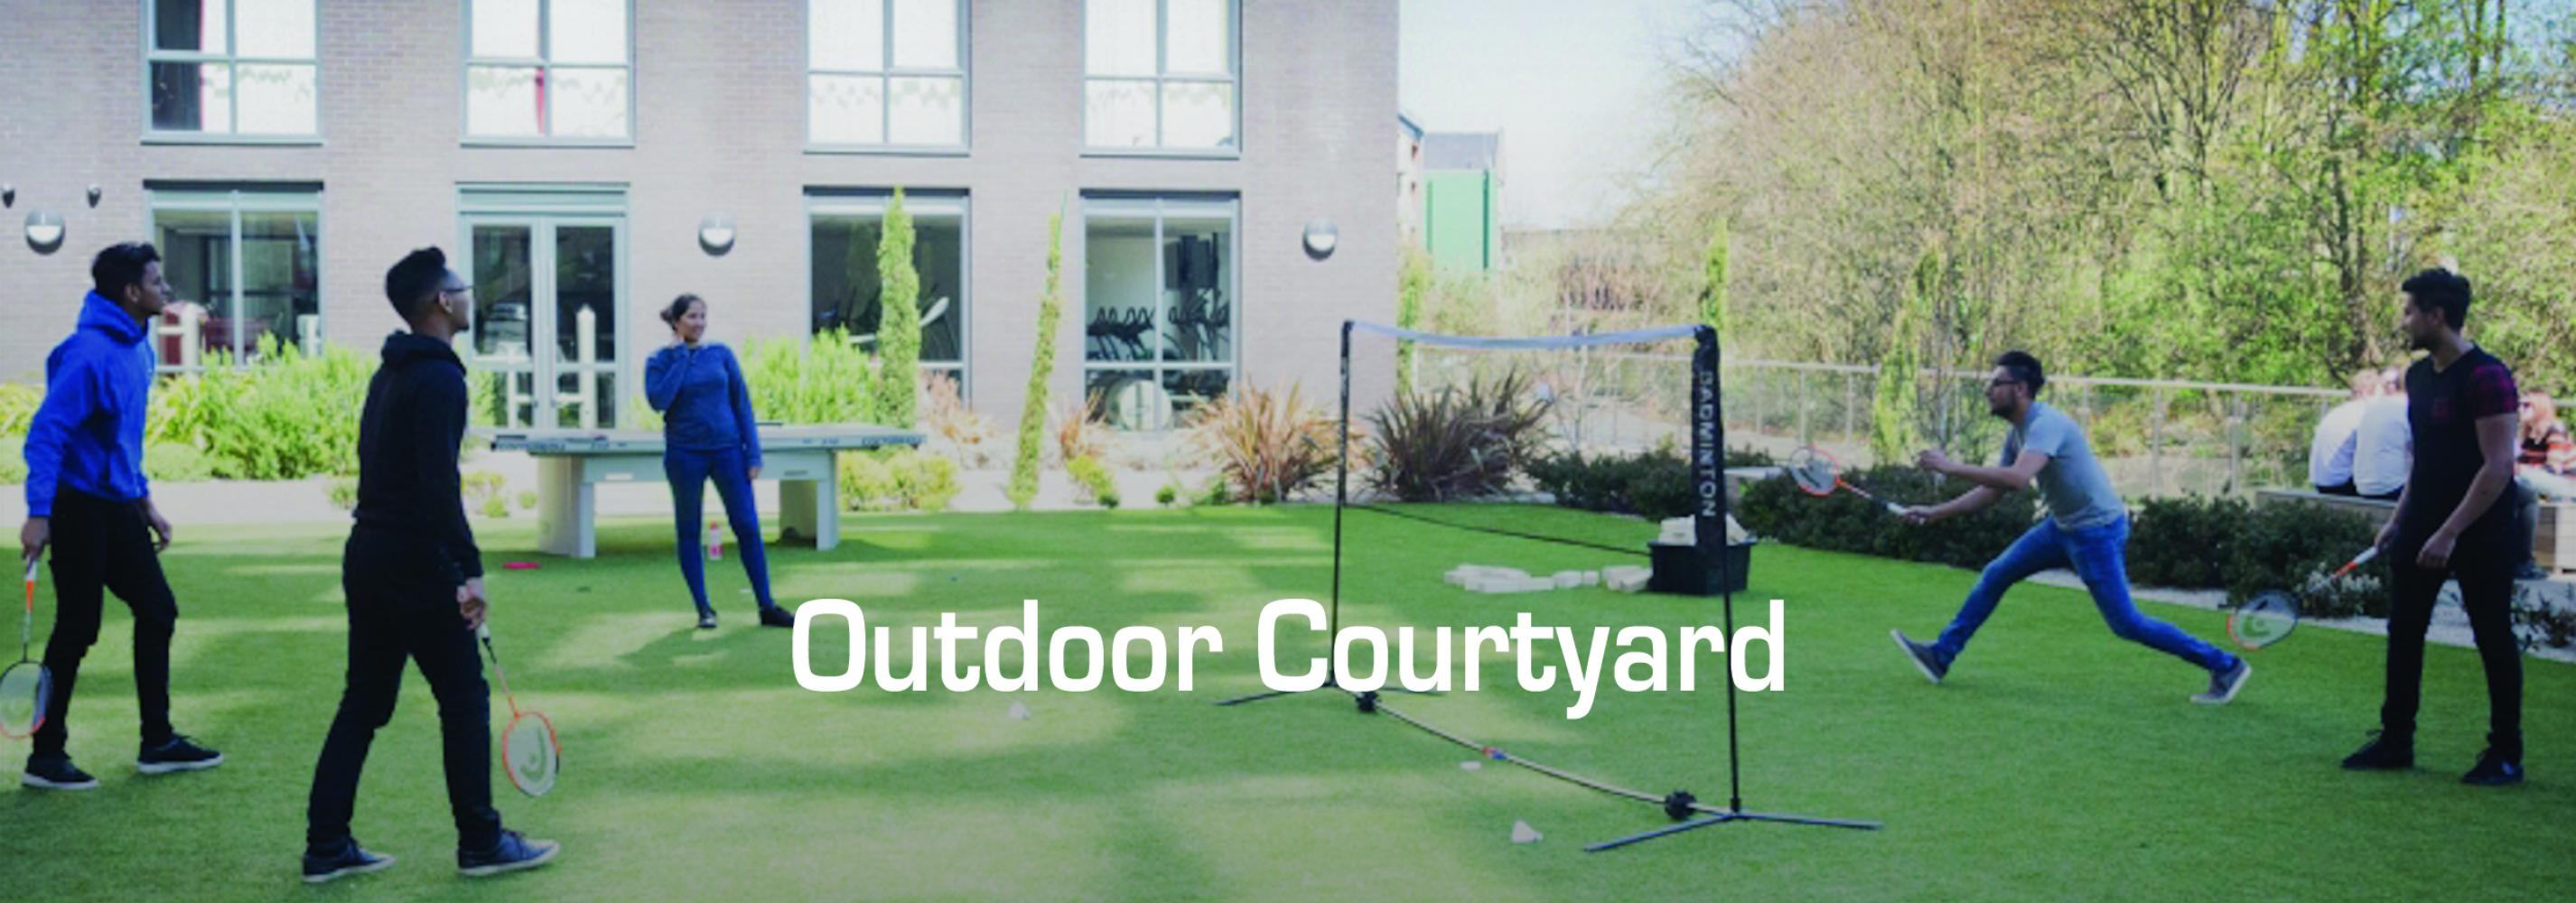 Get some fresh air or play games in our outdoor courtyard